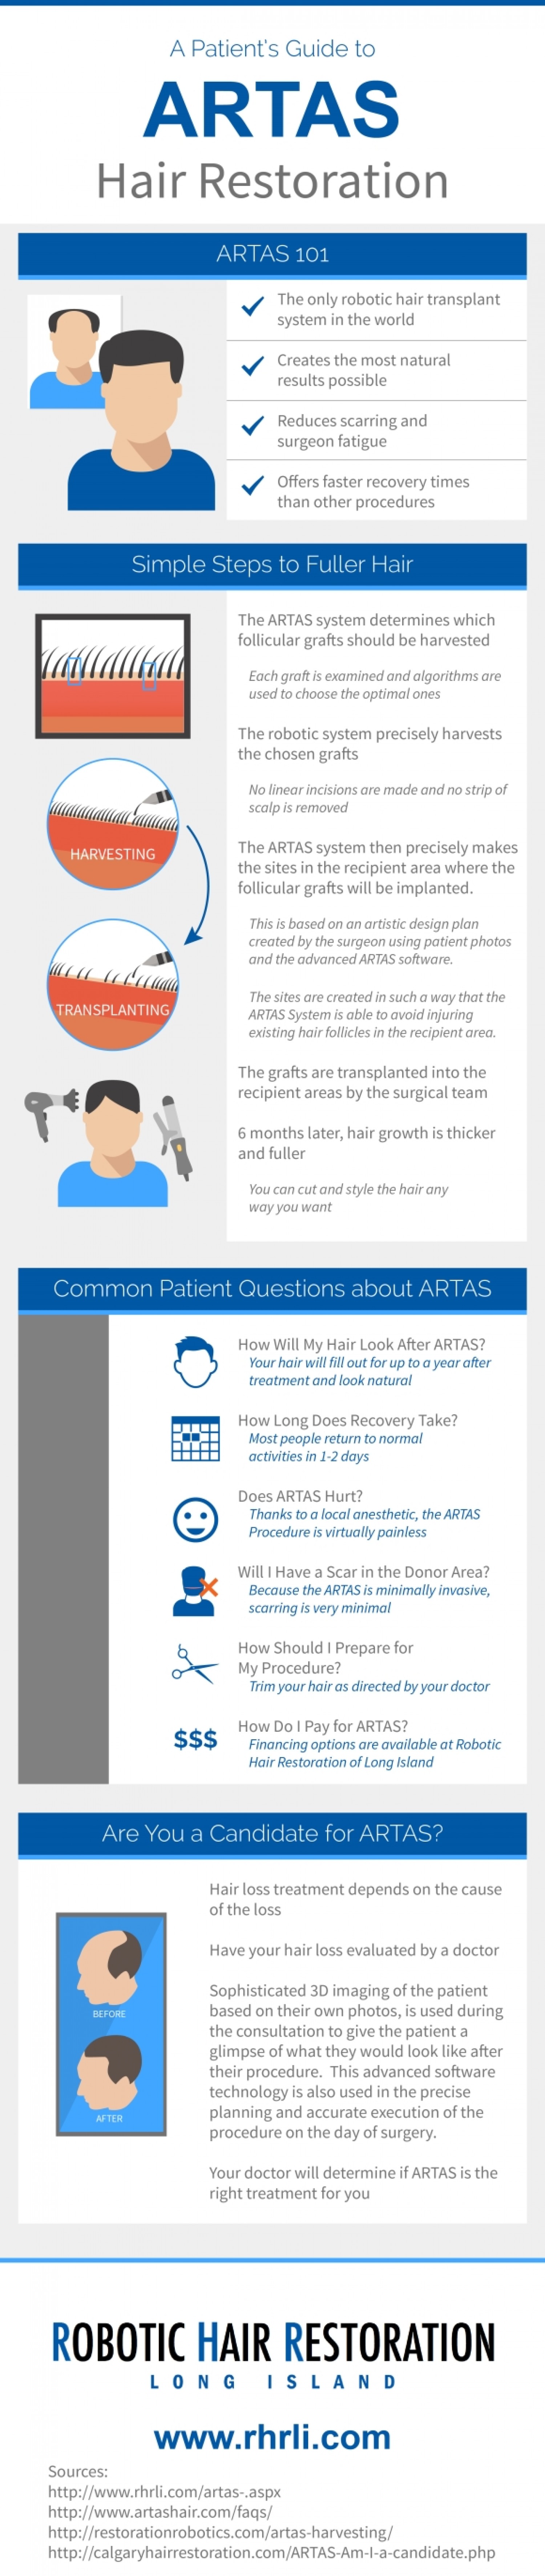 Patients Guide to ARTAS® Hair Restoration from RHRLI